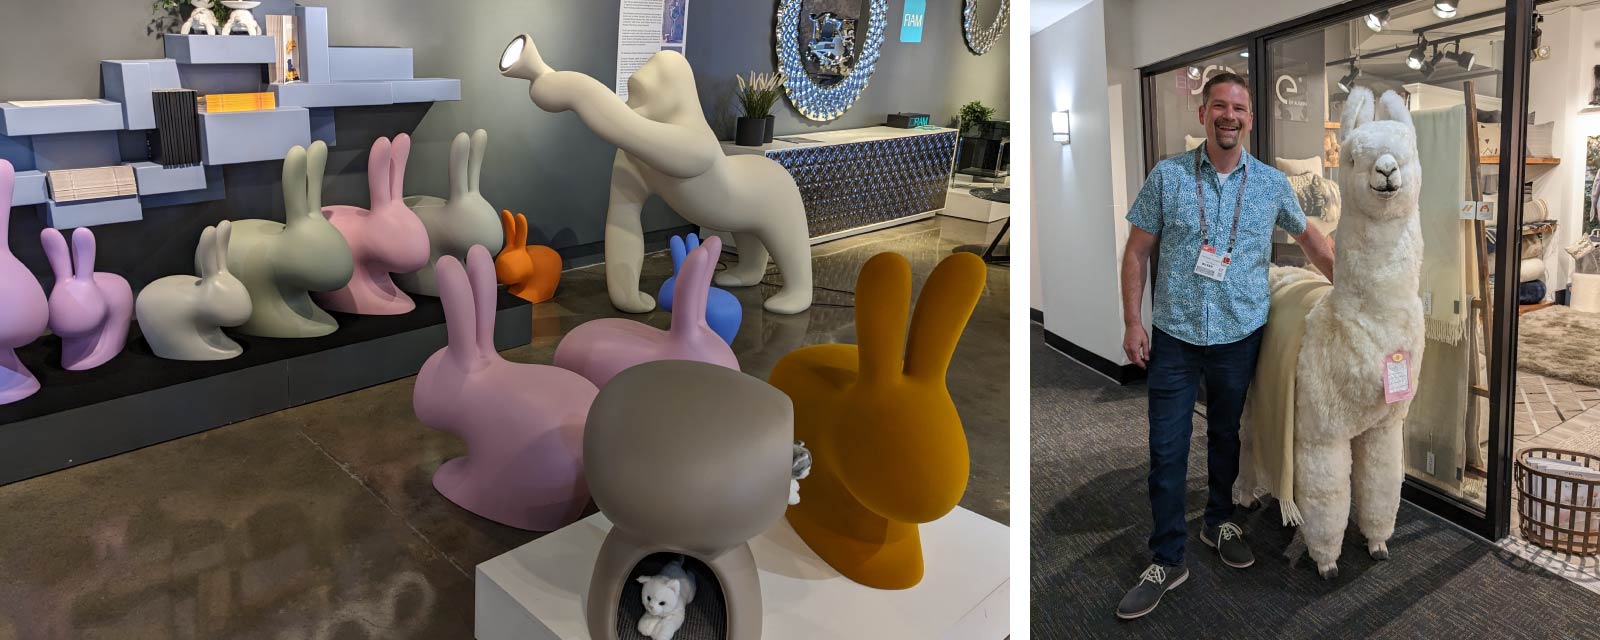 A series of colorful tables shaped like rabbits, a lamp in the shape of a gorilla and a life-sized alpaca stuffed animal